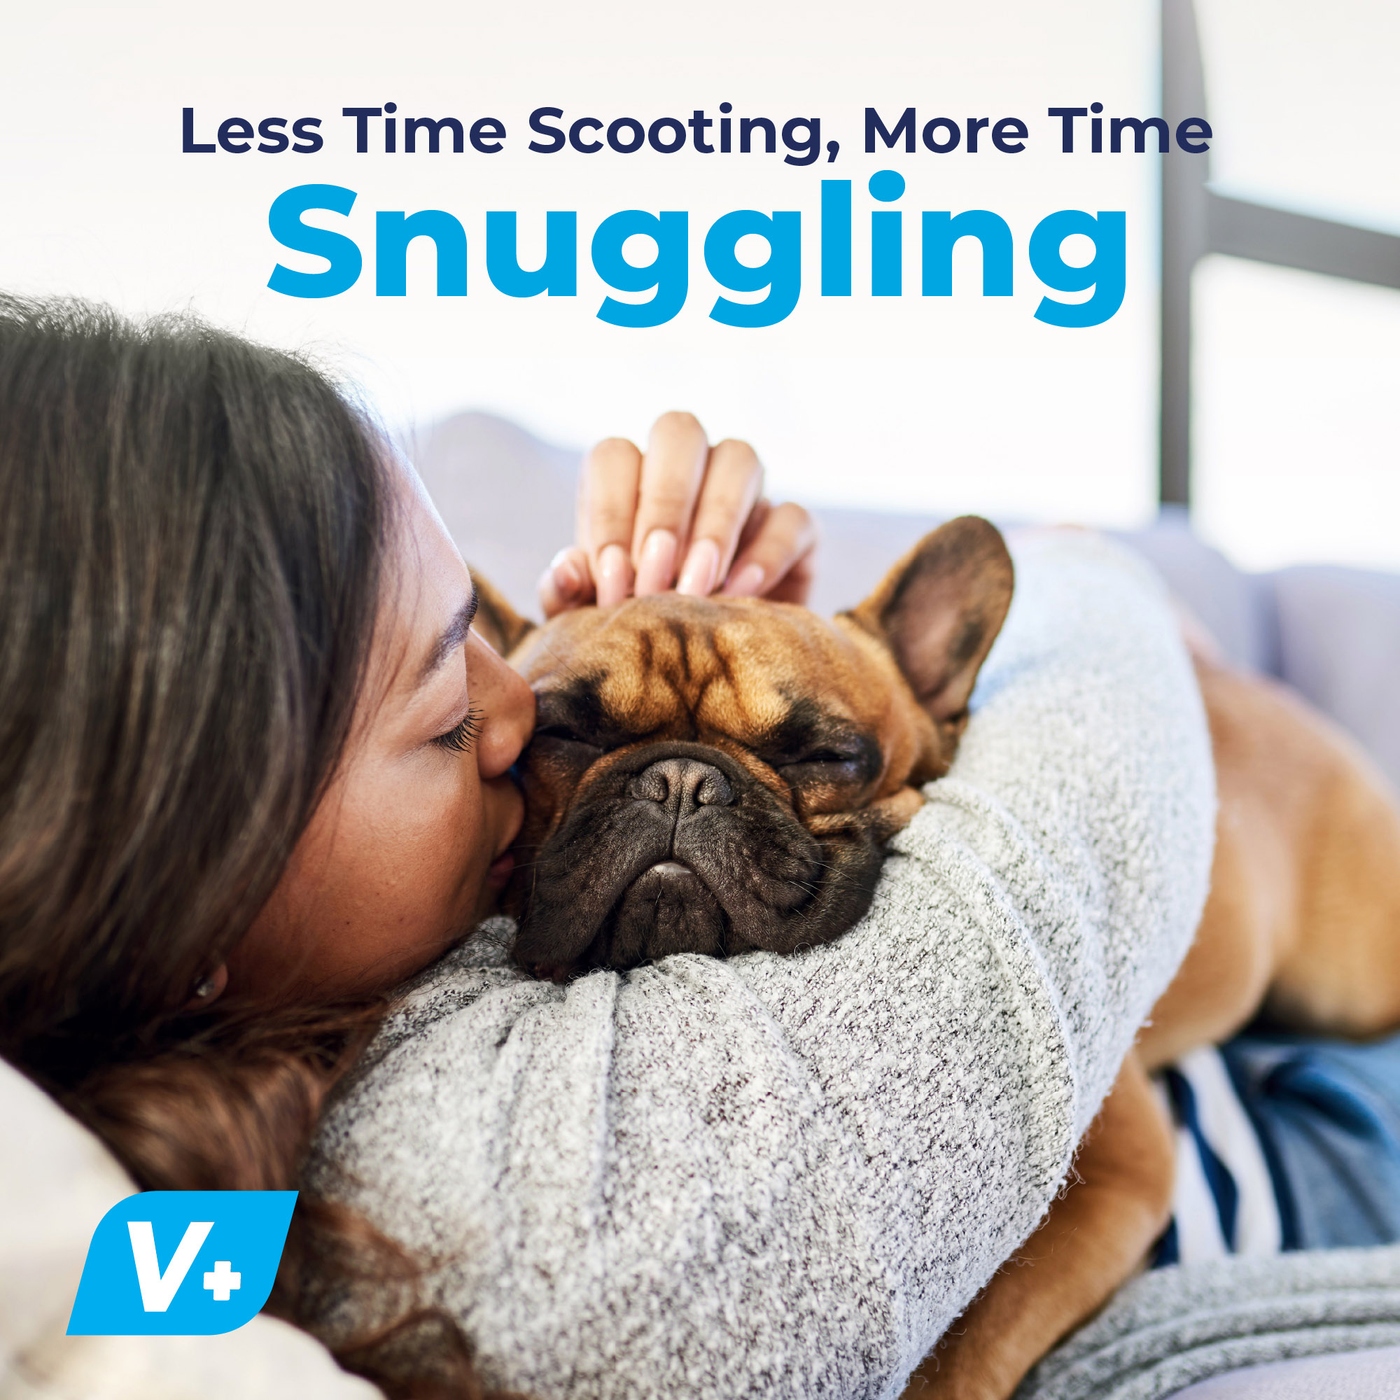 More time for snuggling